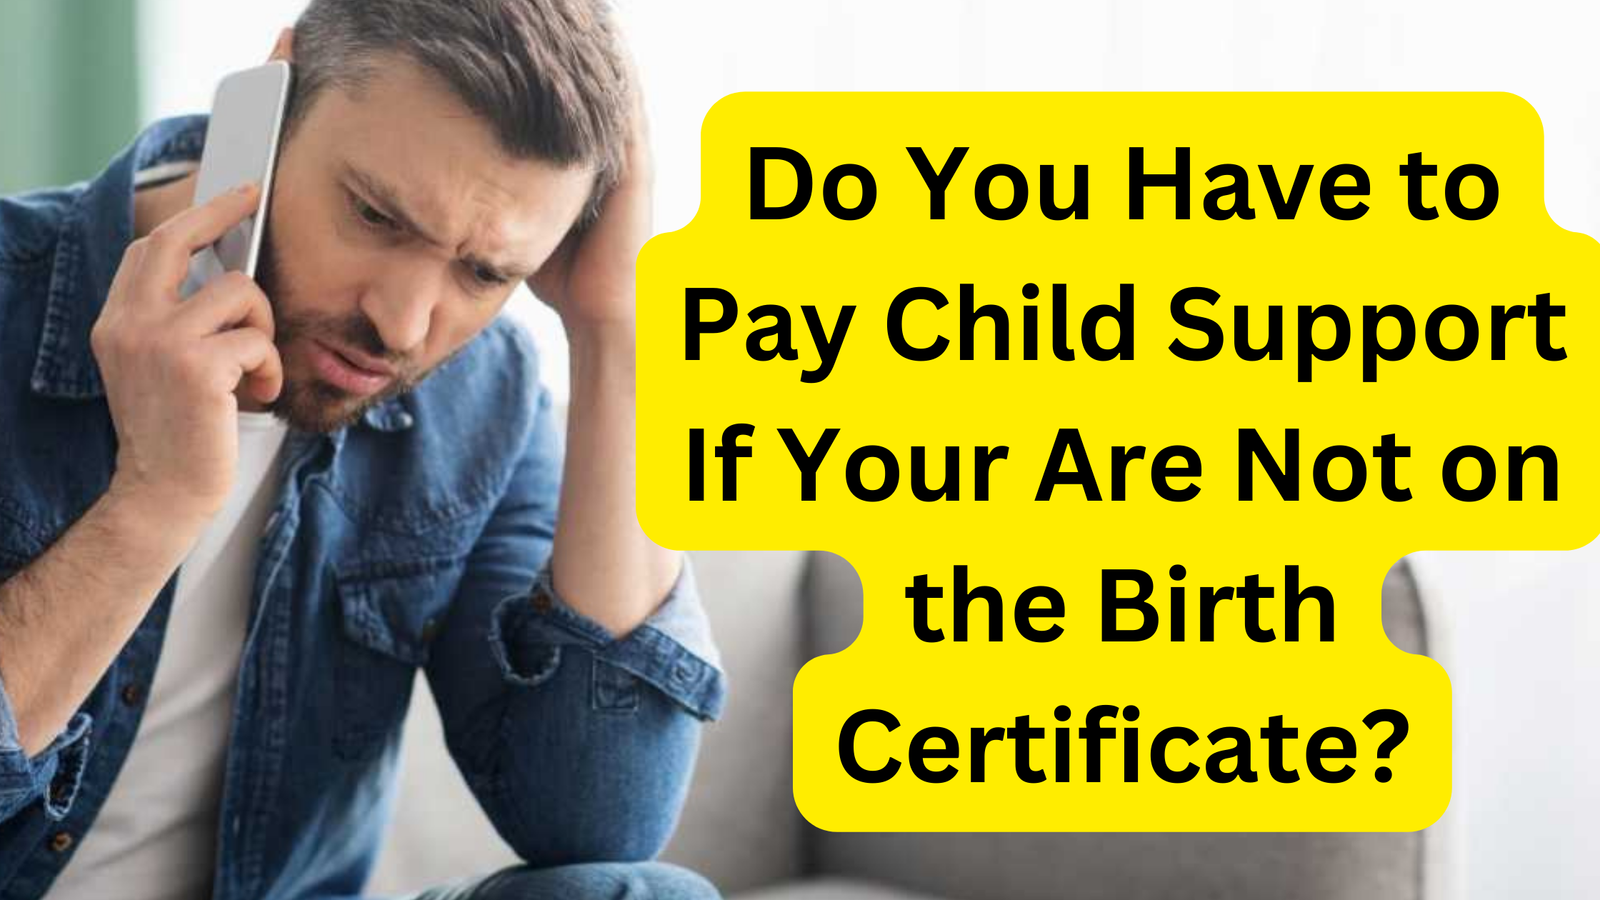 Do You Have to Pay Child Support If Your Are Not on the Birth Certificate